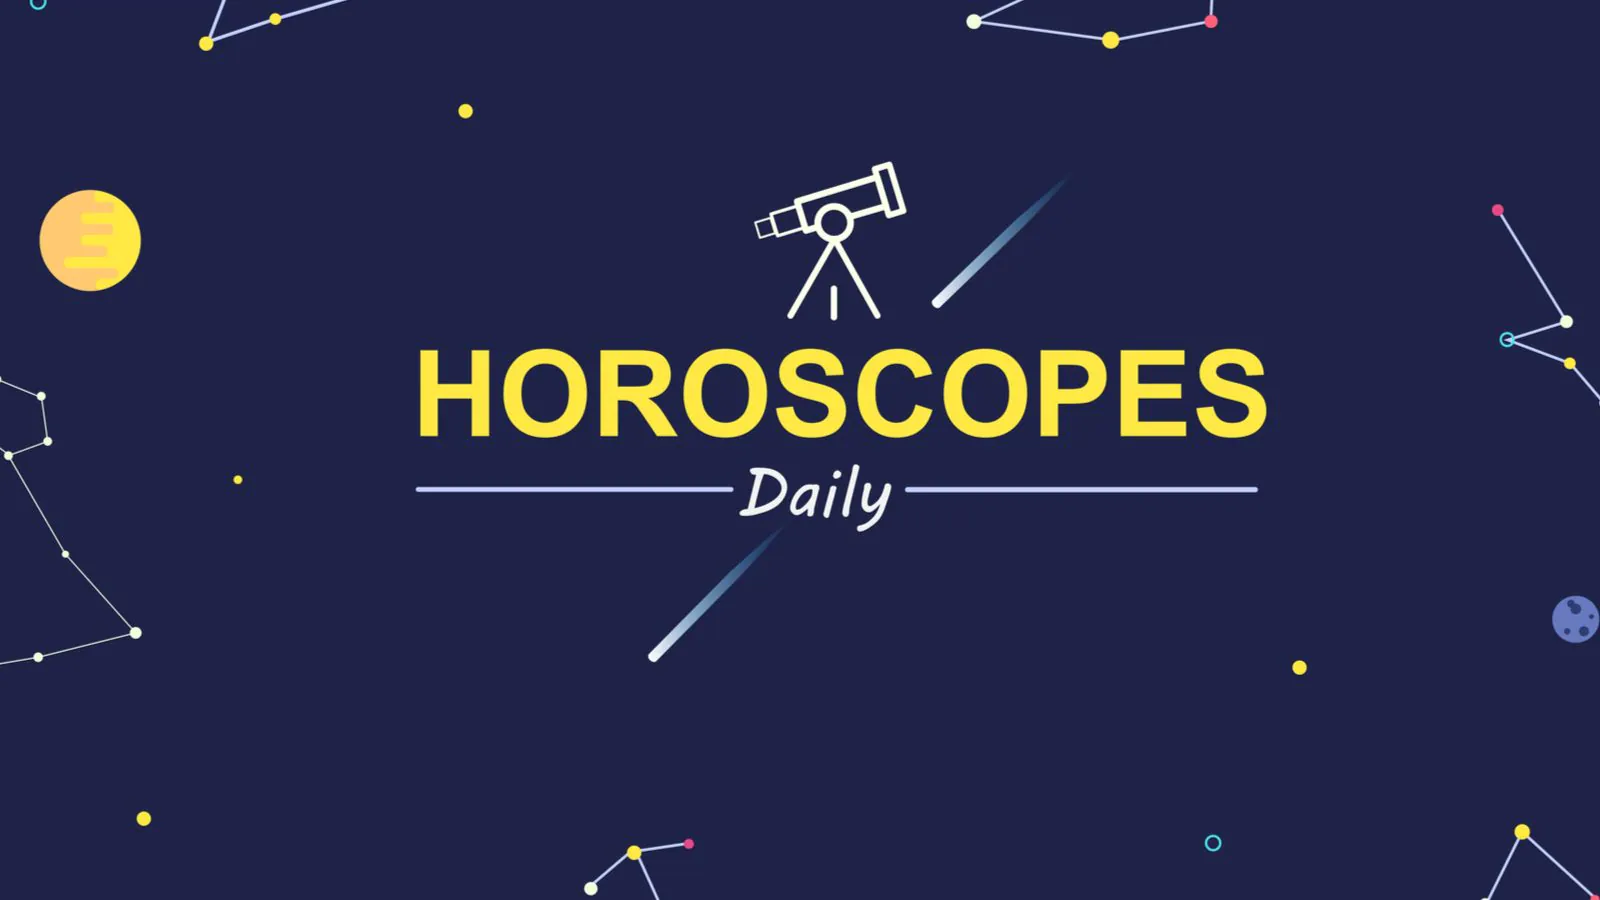 Check Out Daily Astrological Prediction for Aries, Taurus, Libra, Sagittarius And Other Zodiac Signs on Saturday